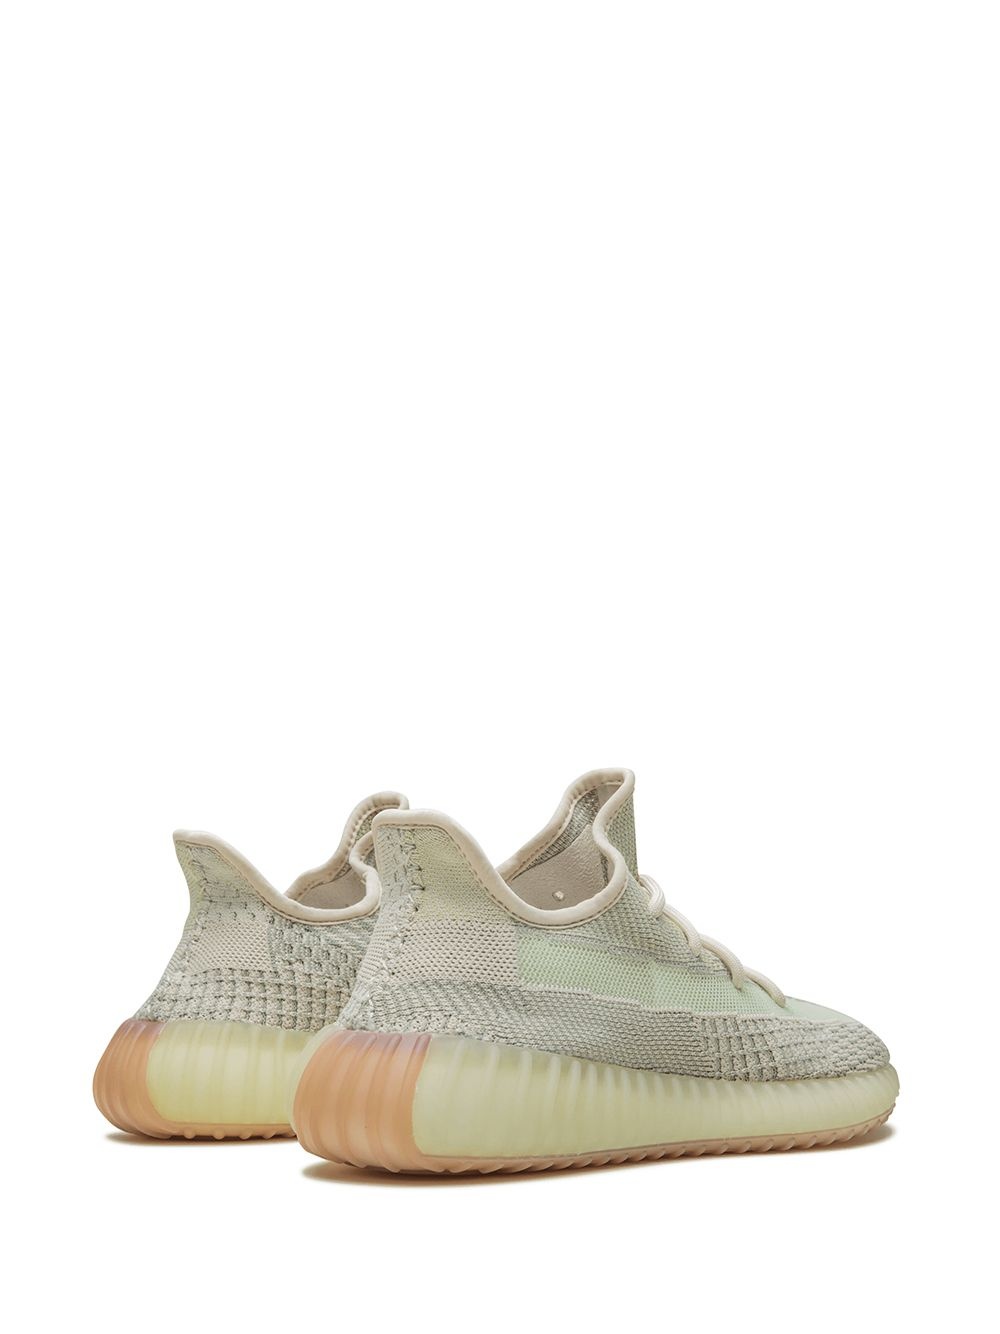 Yeezy Boost 350 V2 "Citrin" sneakers - 3